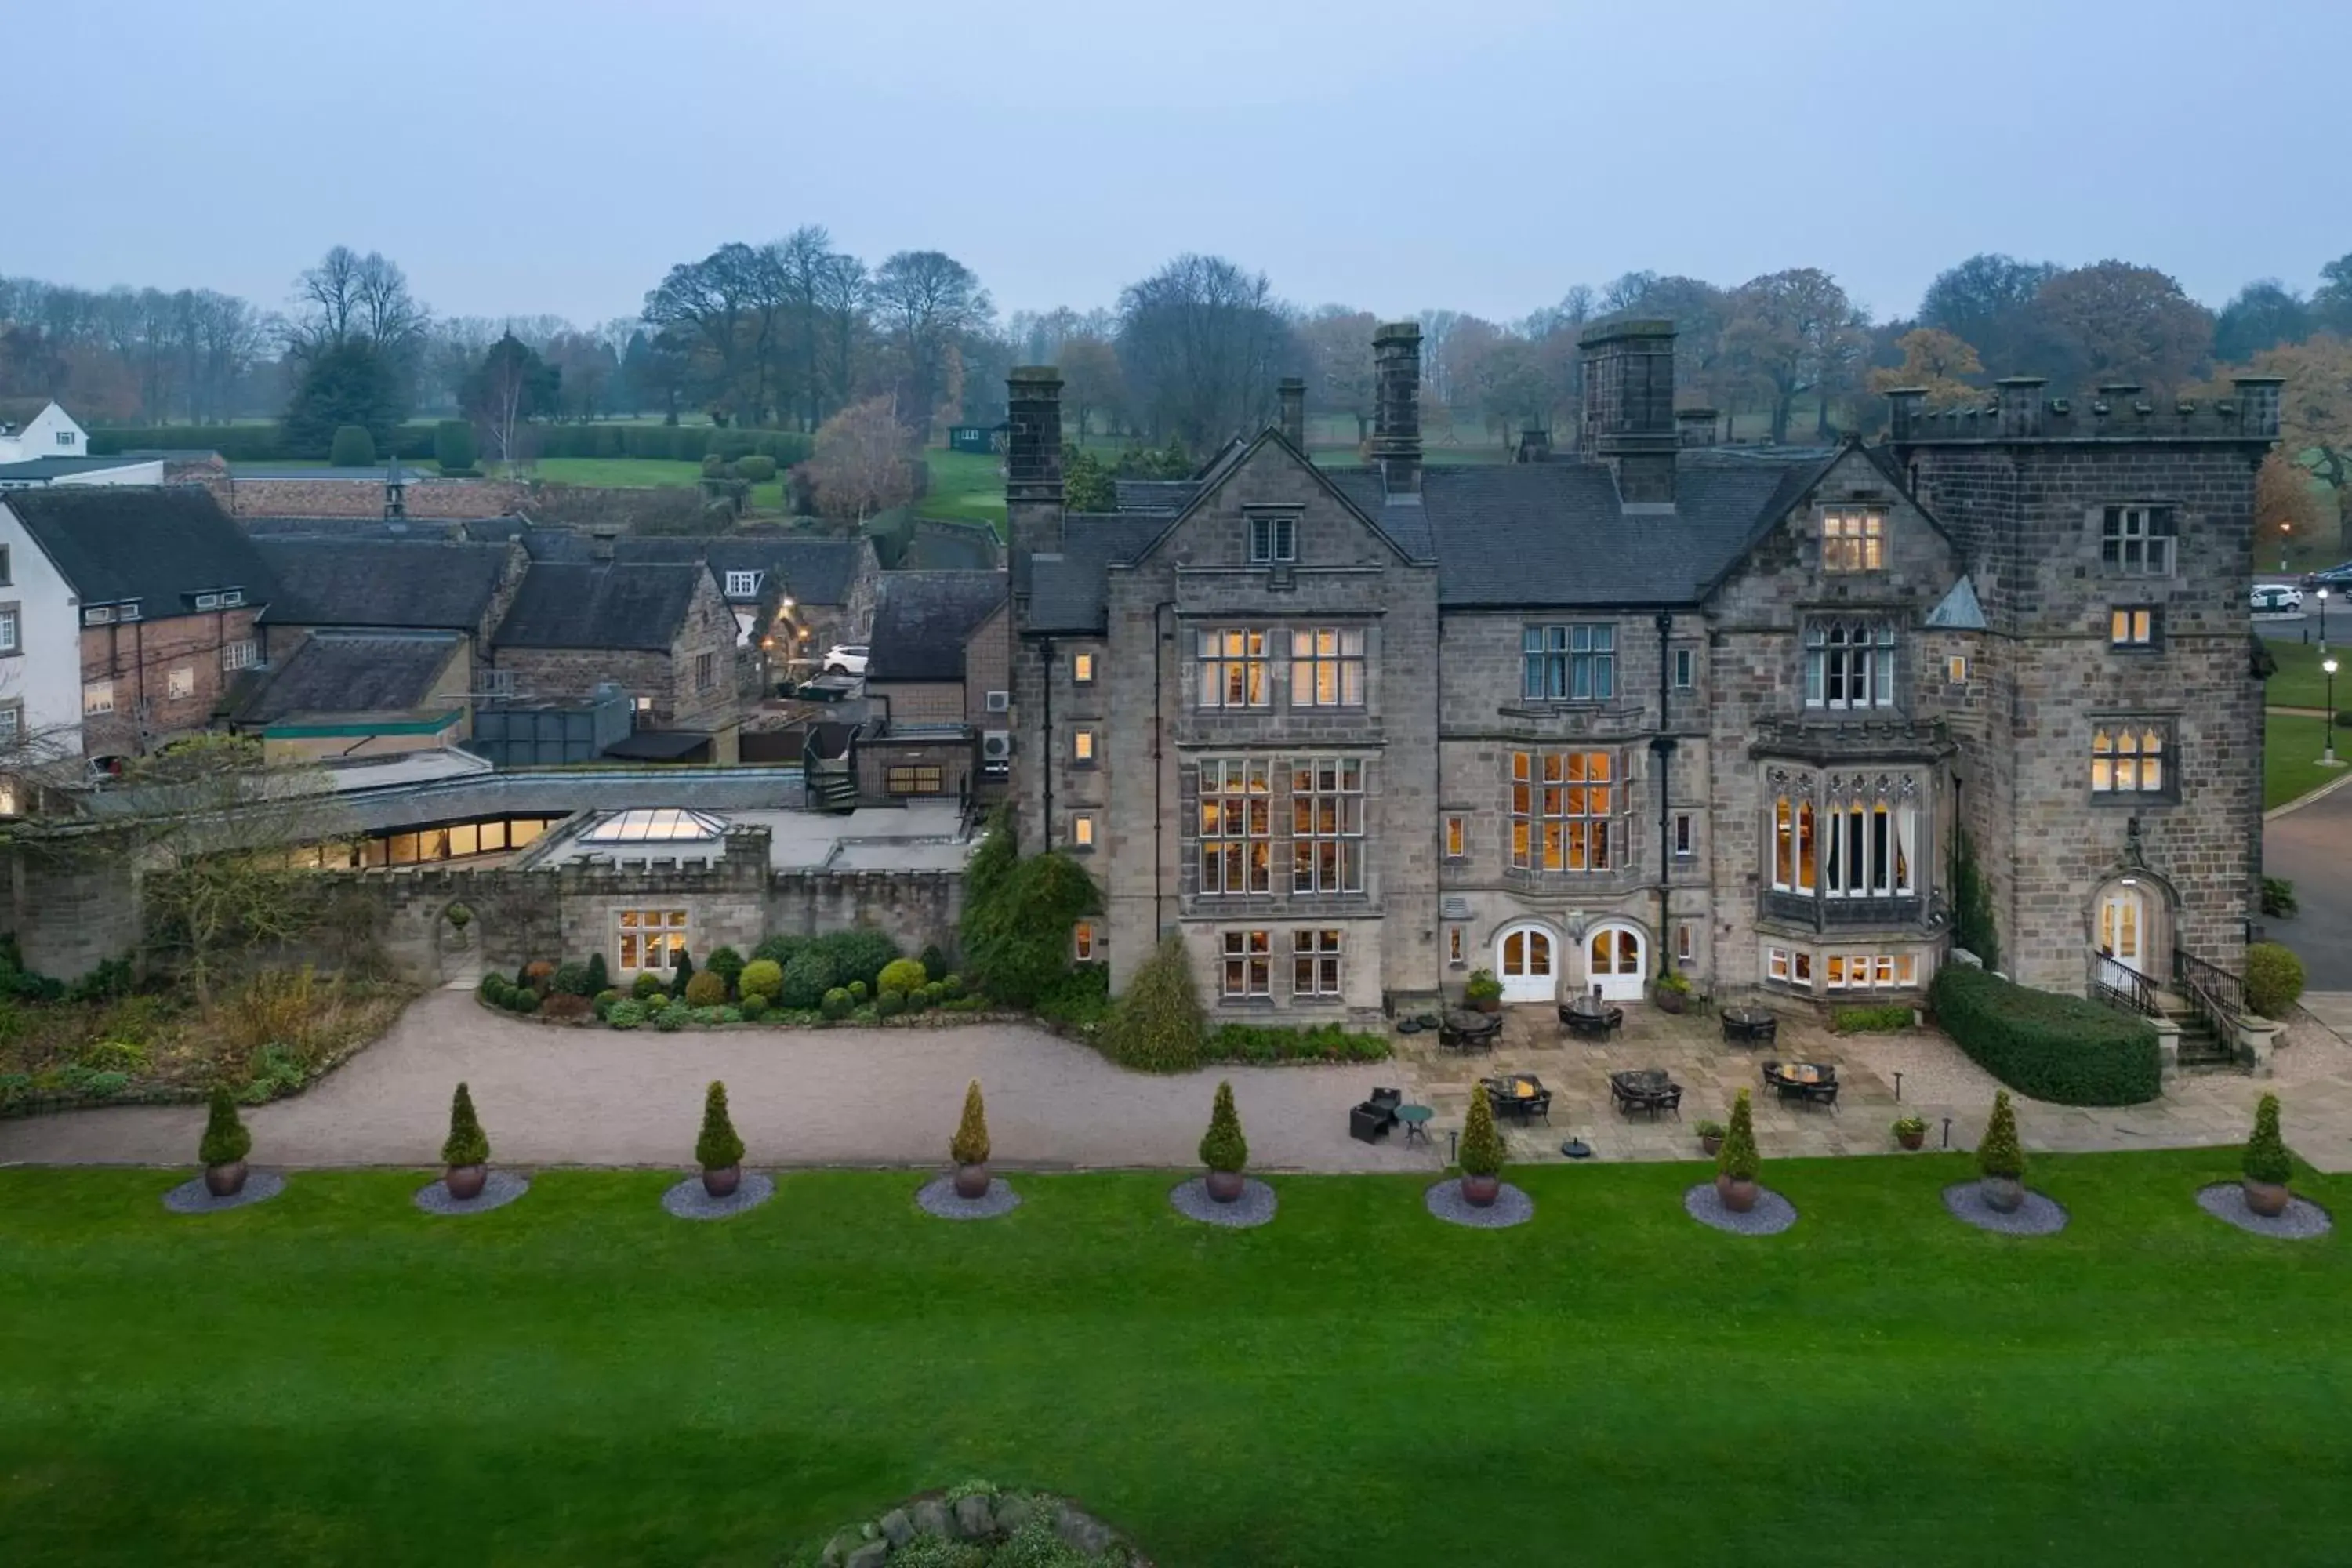 Property building in Delta Hotels by Marriott Breadsall Priory Country Club